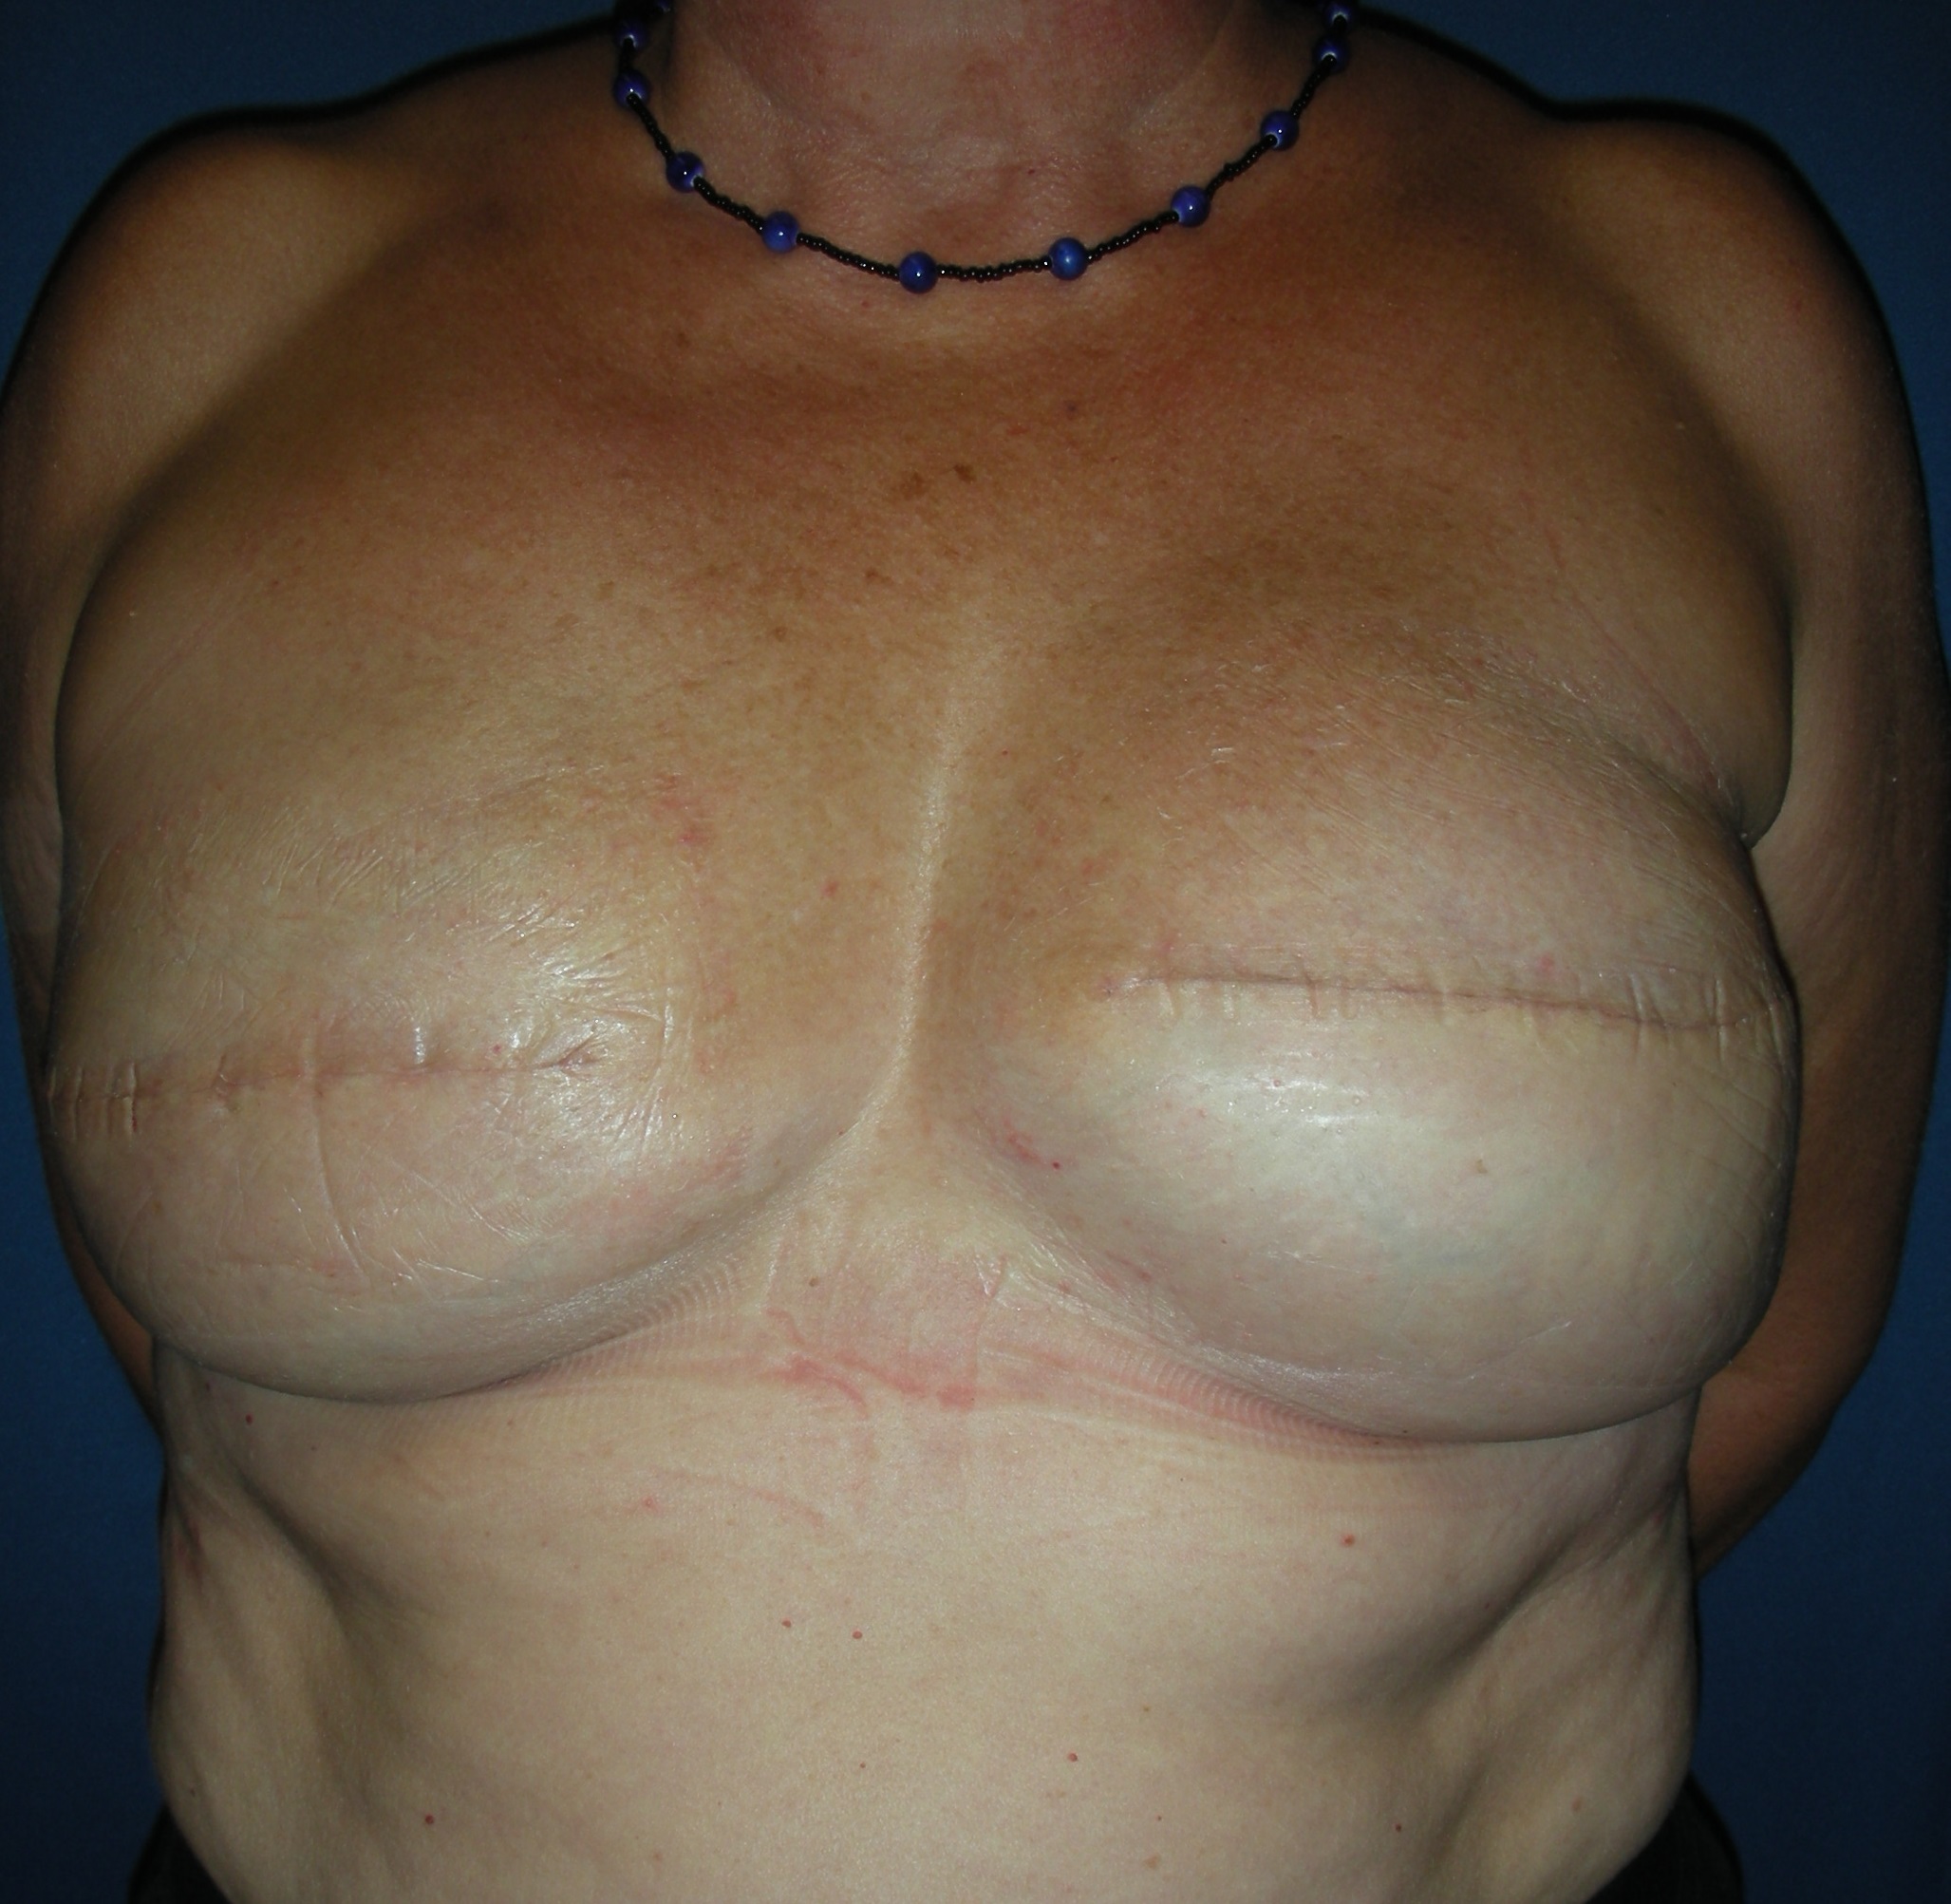 Bilateral breast reconstruction with implants